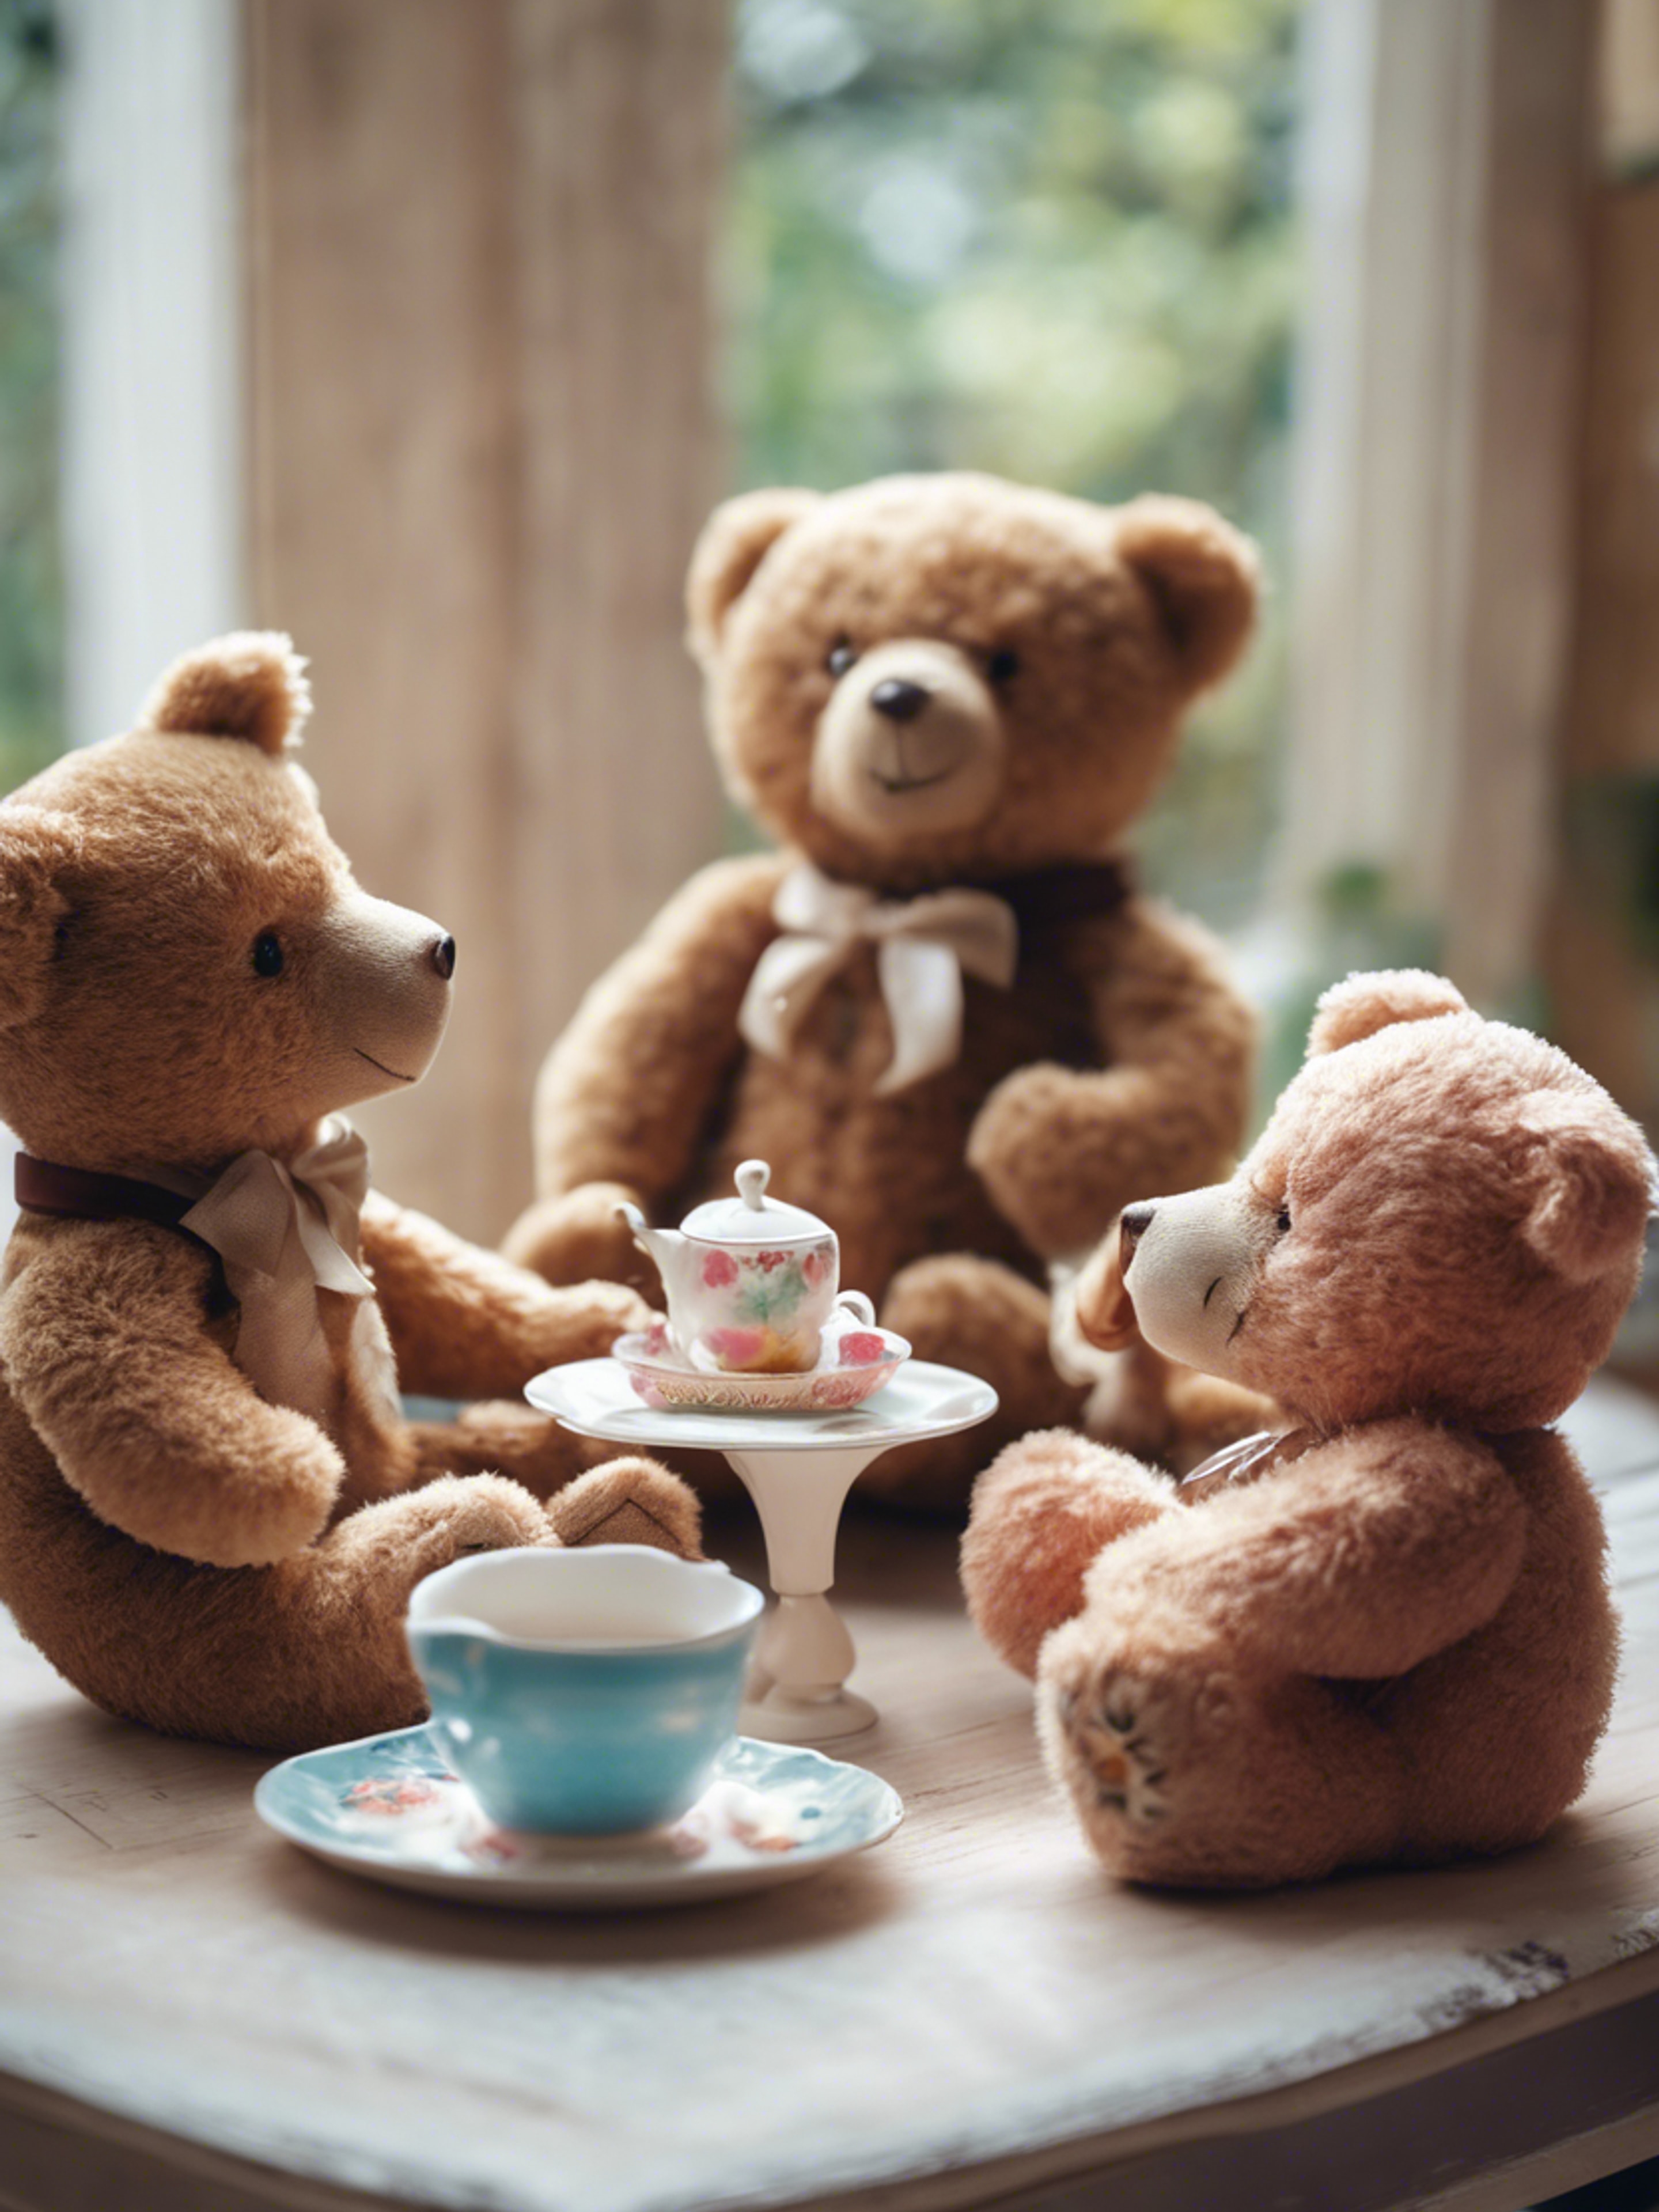 A group of teddy bears having a playful tea party in a child's room. Hintergrund[5c3b9dbbb3984ccebf50]